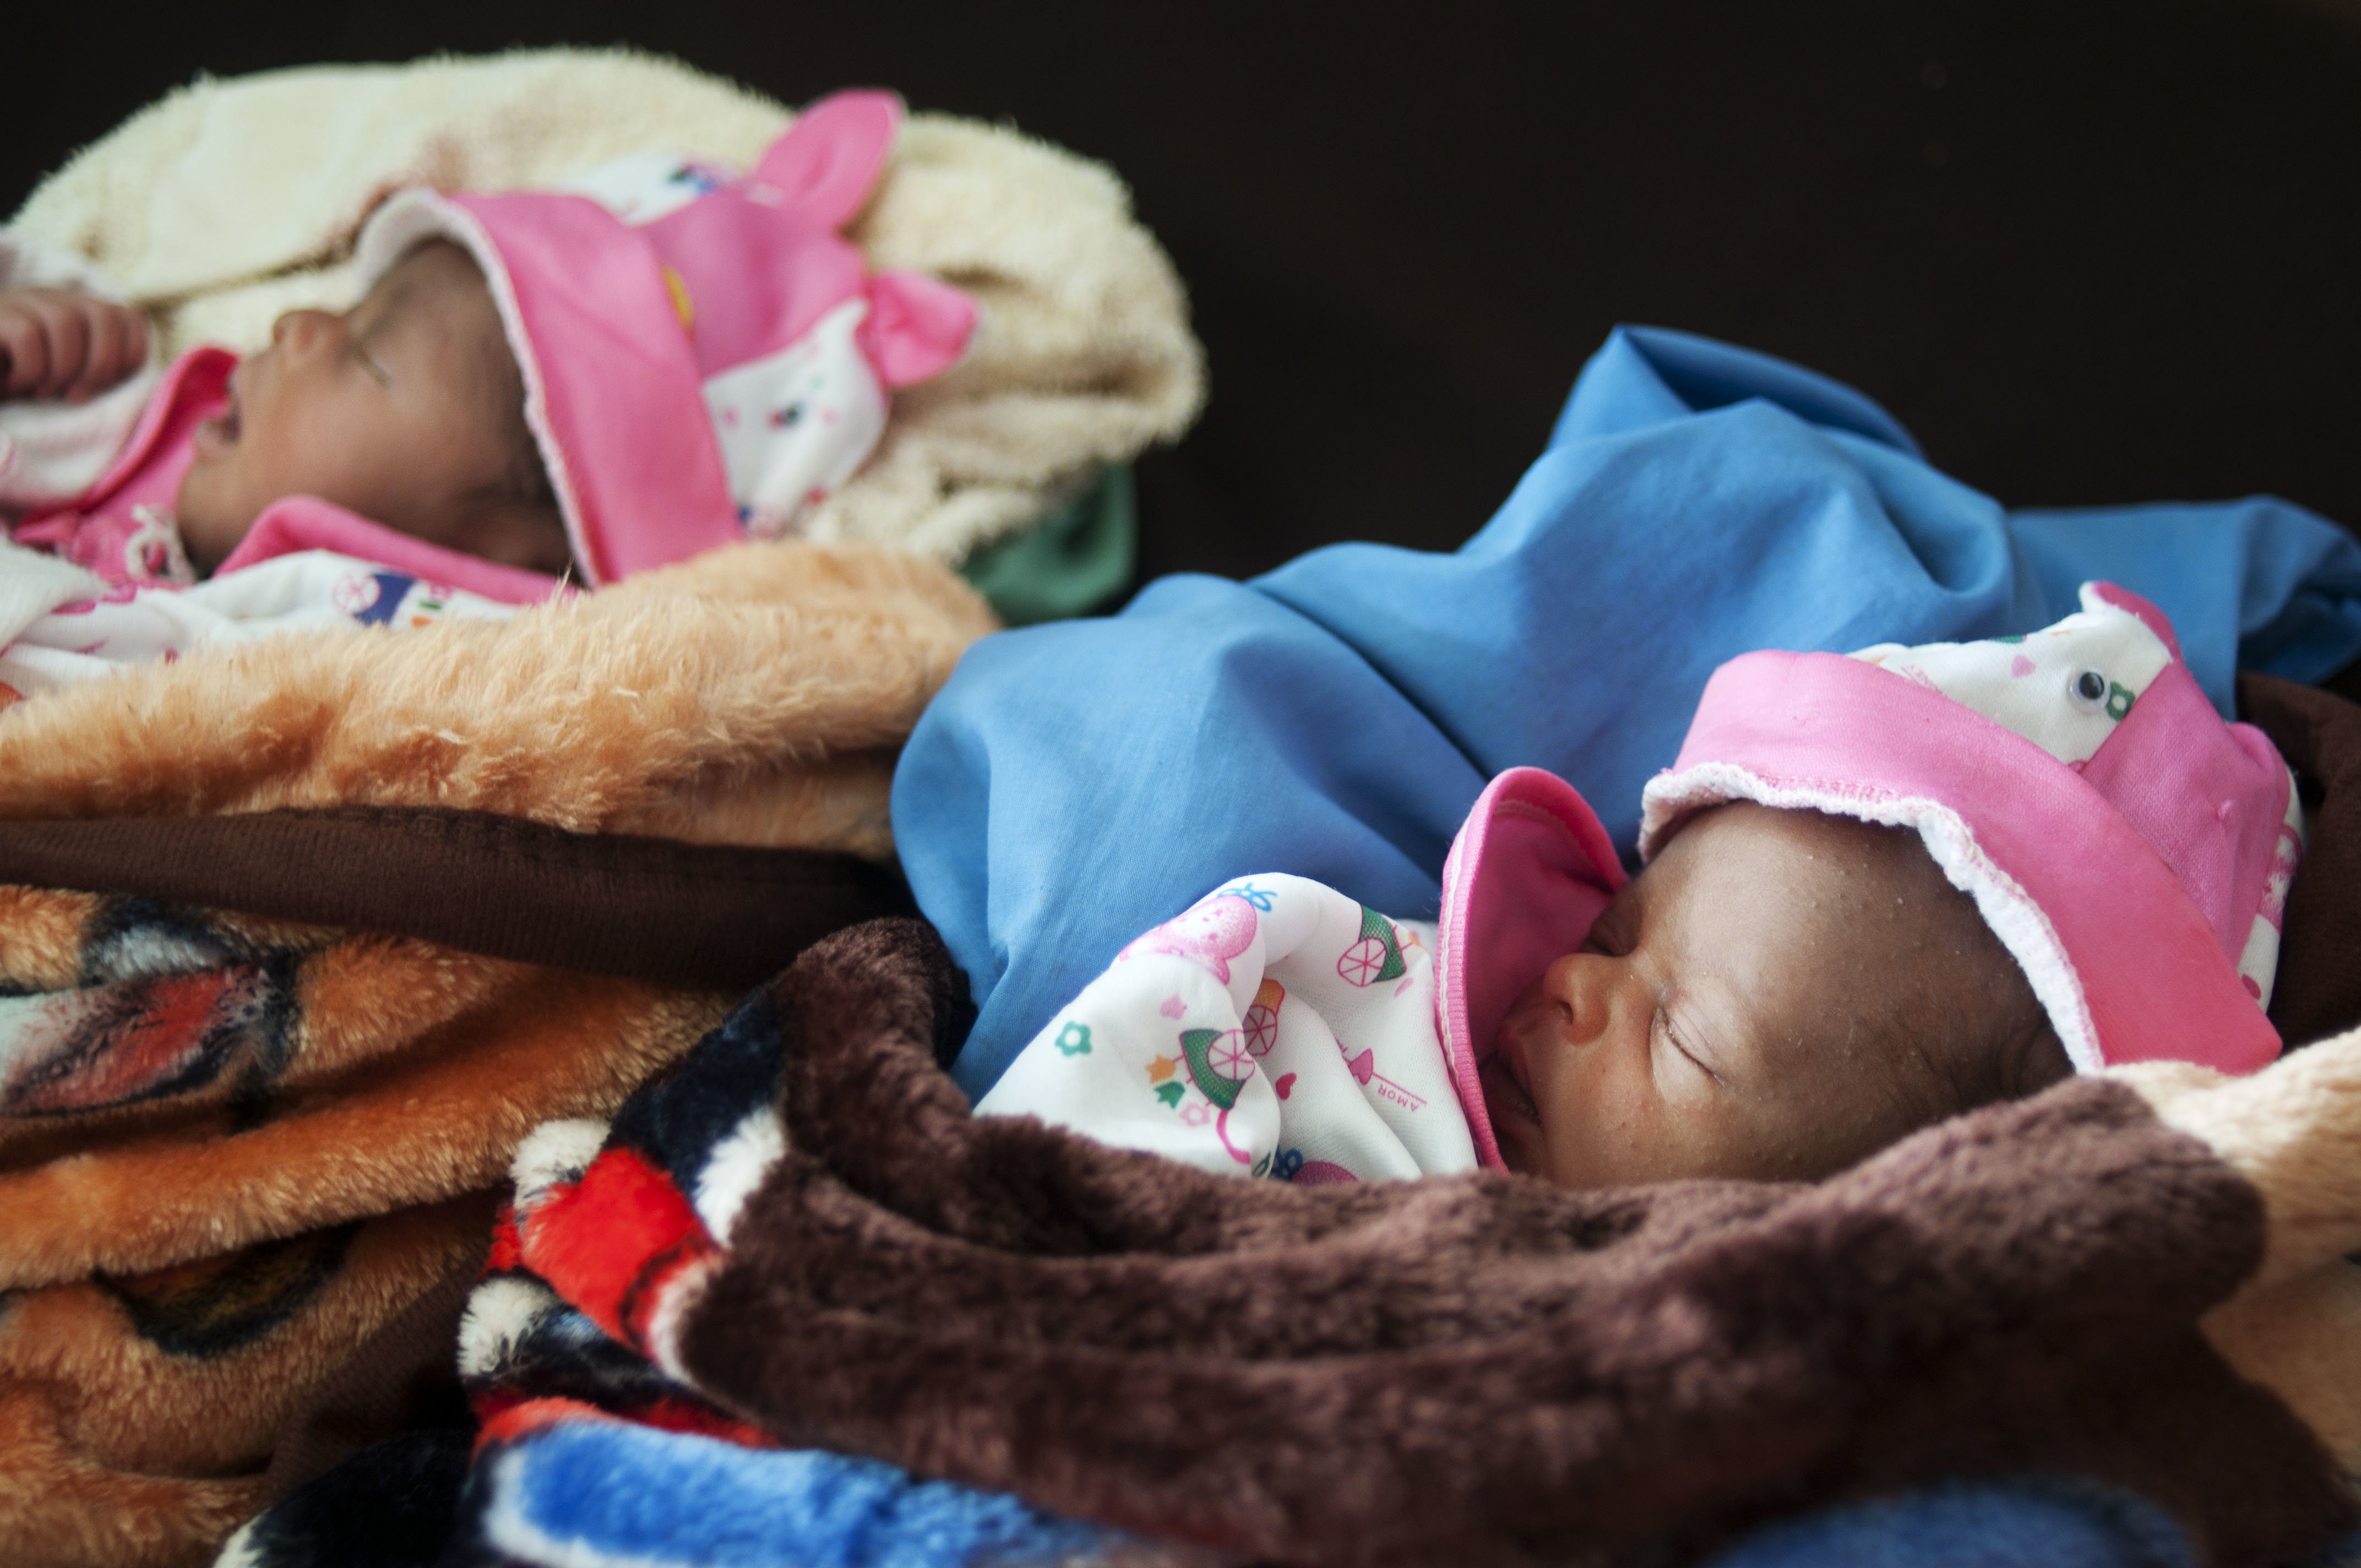 New born twins Marina and Nina, Central African Republic. August 2012| Photo: Getty Images